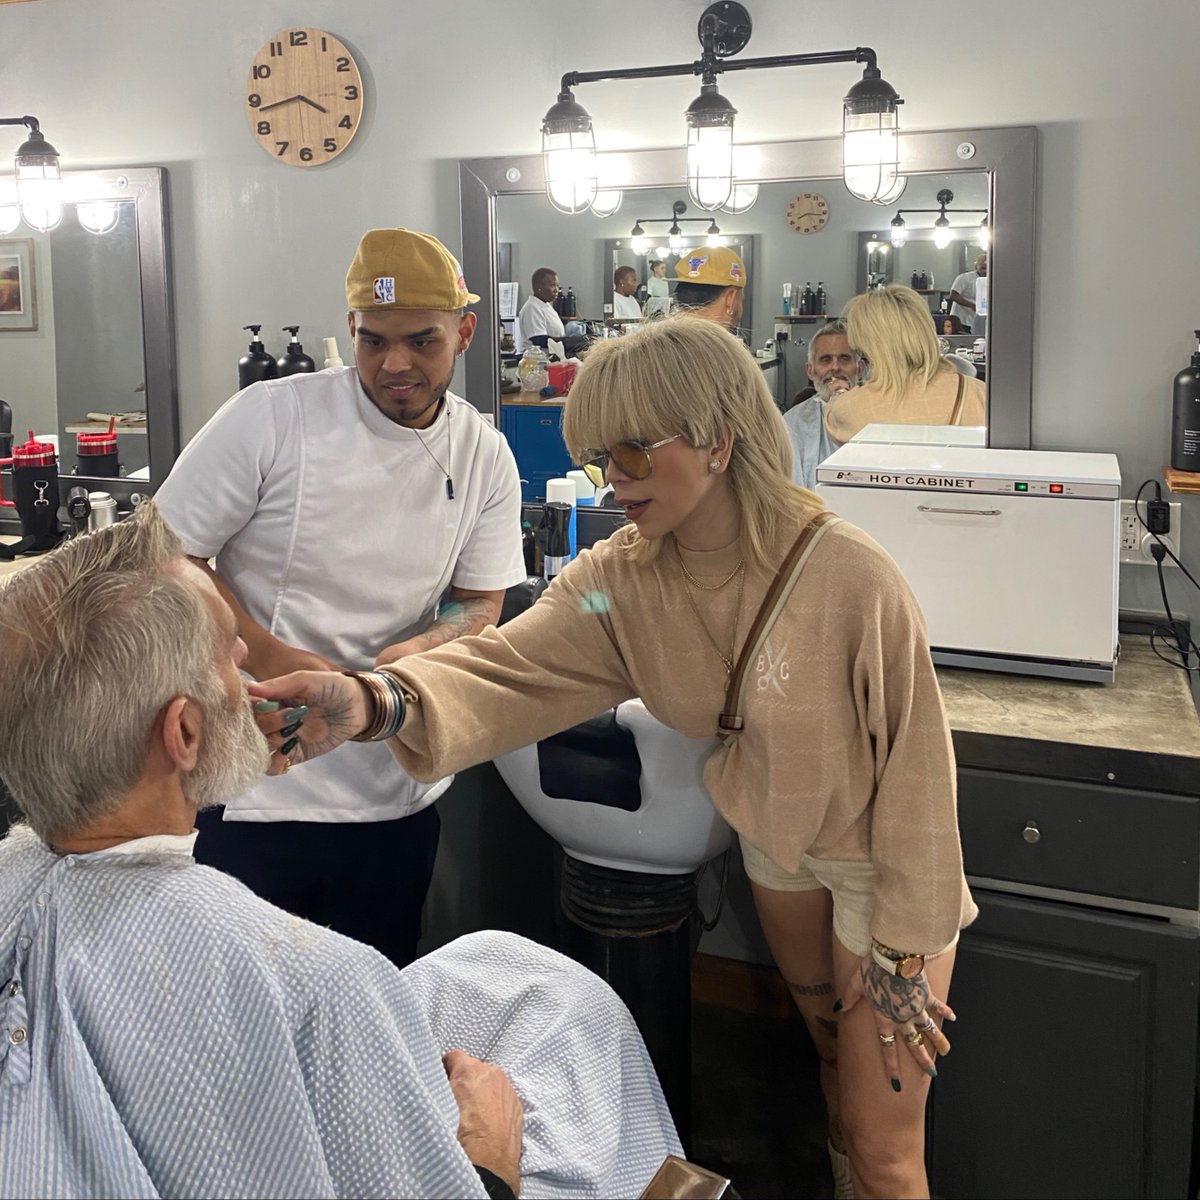 Crafting the perfect barbers! 

#sharpfade #barberconnect #fadehaircut #mensfashion #haircuts #barberstyle #hairdresser #menstyle #haircolor #faded #barbero #barberpost #fadegame #taper #beauty #barbeiro #fades #wahlpro #men #barbersince #barberhub #love #waves